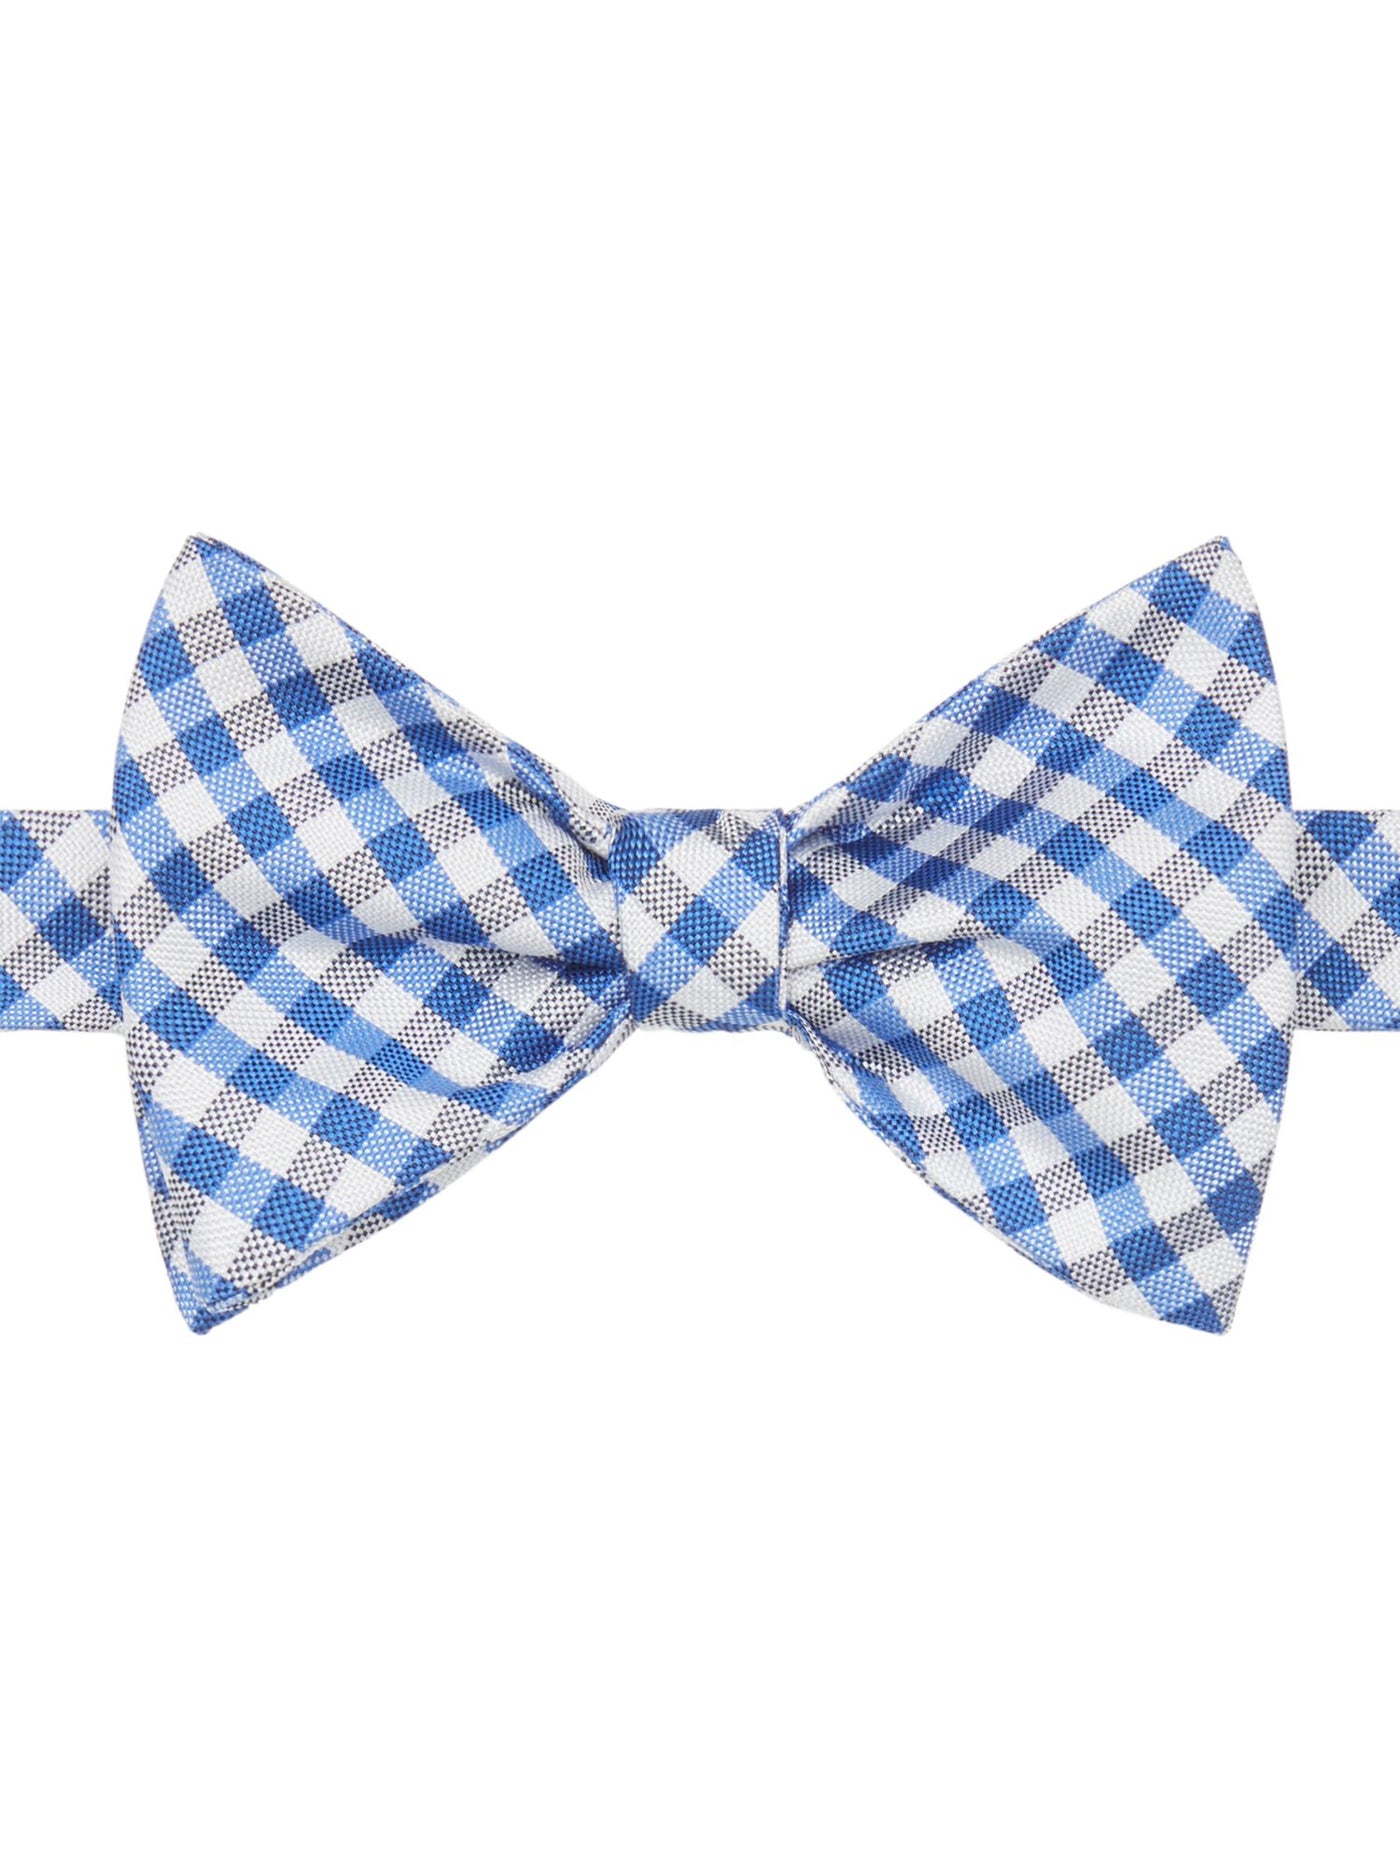 TOMMY HILFIGER Mens Blue Gingham Bow Tie